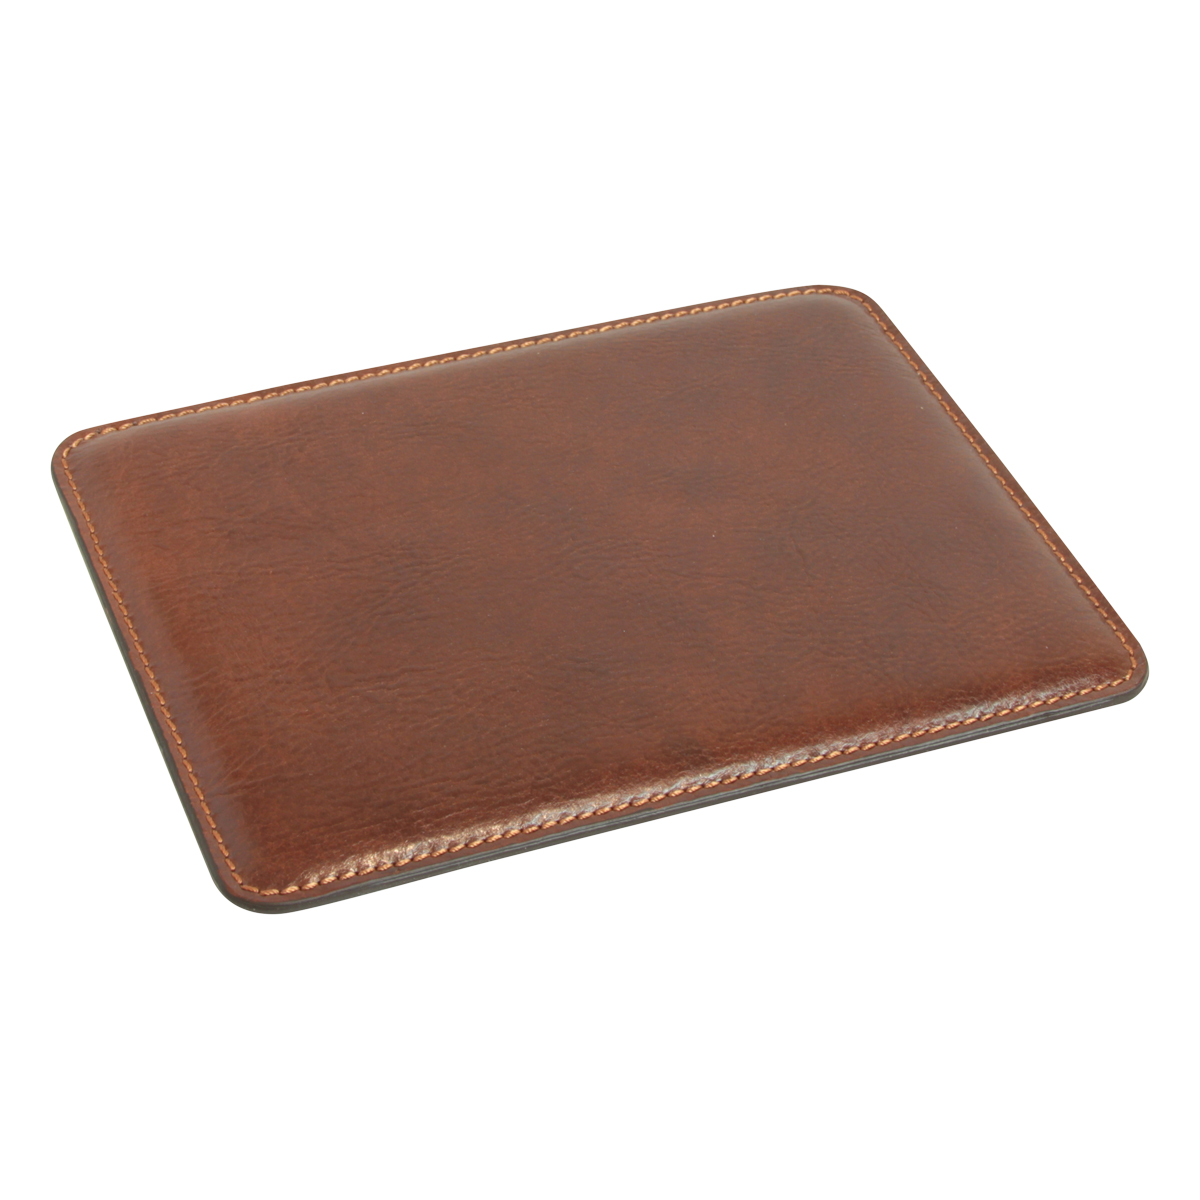 Leather Mouse pad - Brown | 752005MA UK | Old Angler Firenze